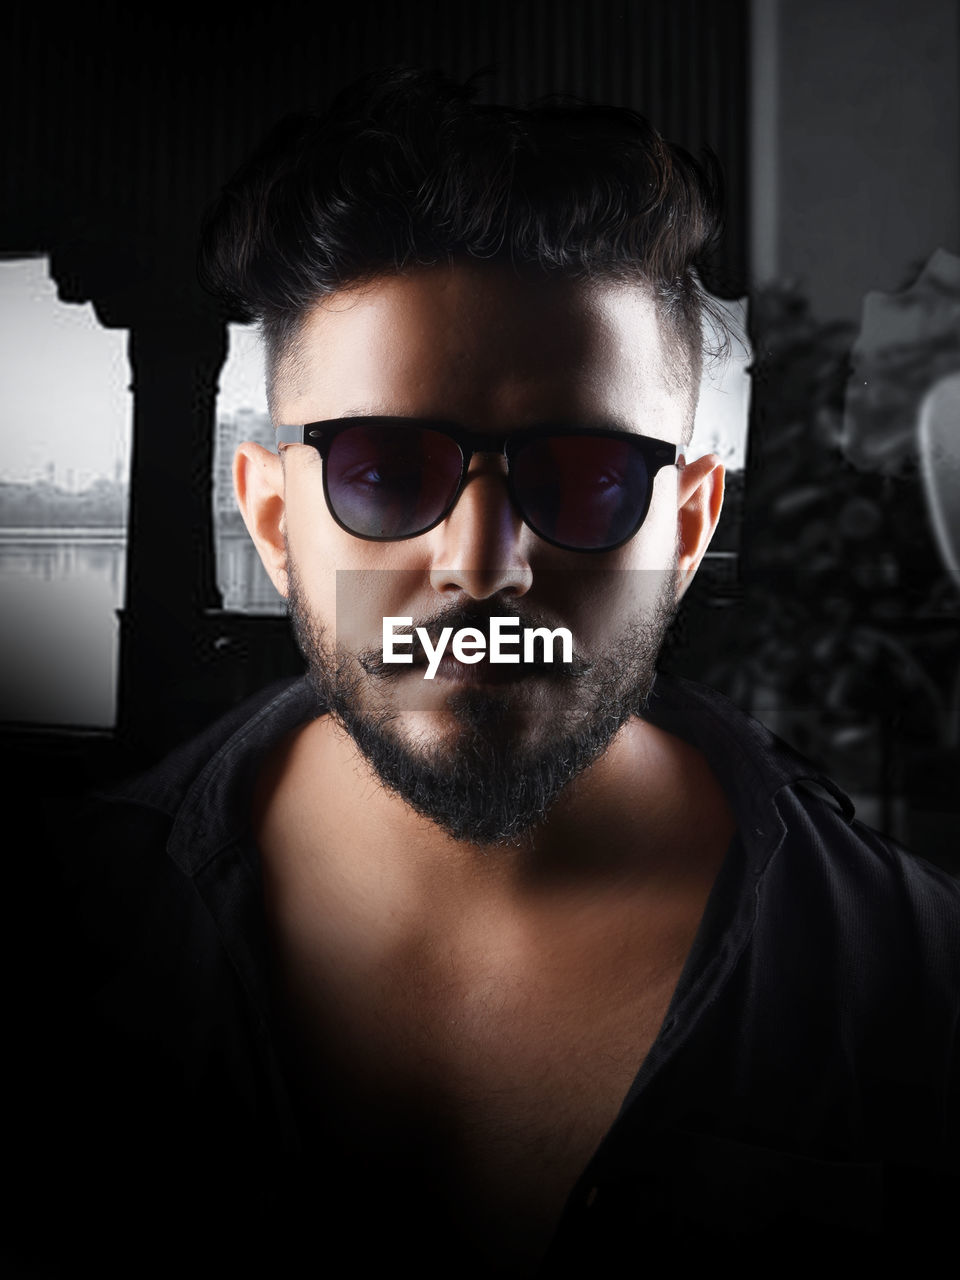 eyewear, fashion, black, vision care, portrait, sunglasses, one person, human hair, glasses, adult, facial hair, hairstyle, men, beard, headshot, young adult, dark, indoors, goggles, human face, darkness, cool attitude, looking at camera, moustache, serious, front view, cool, person, studio shot